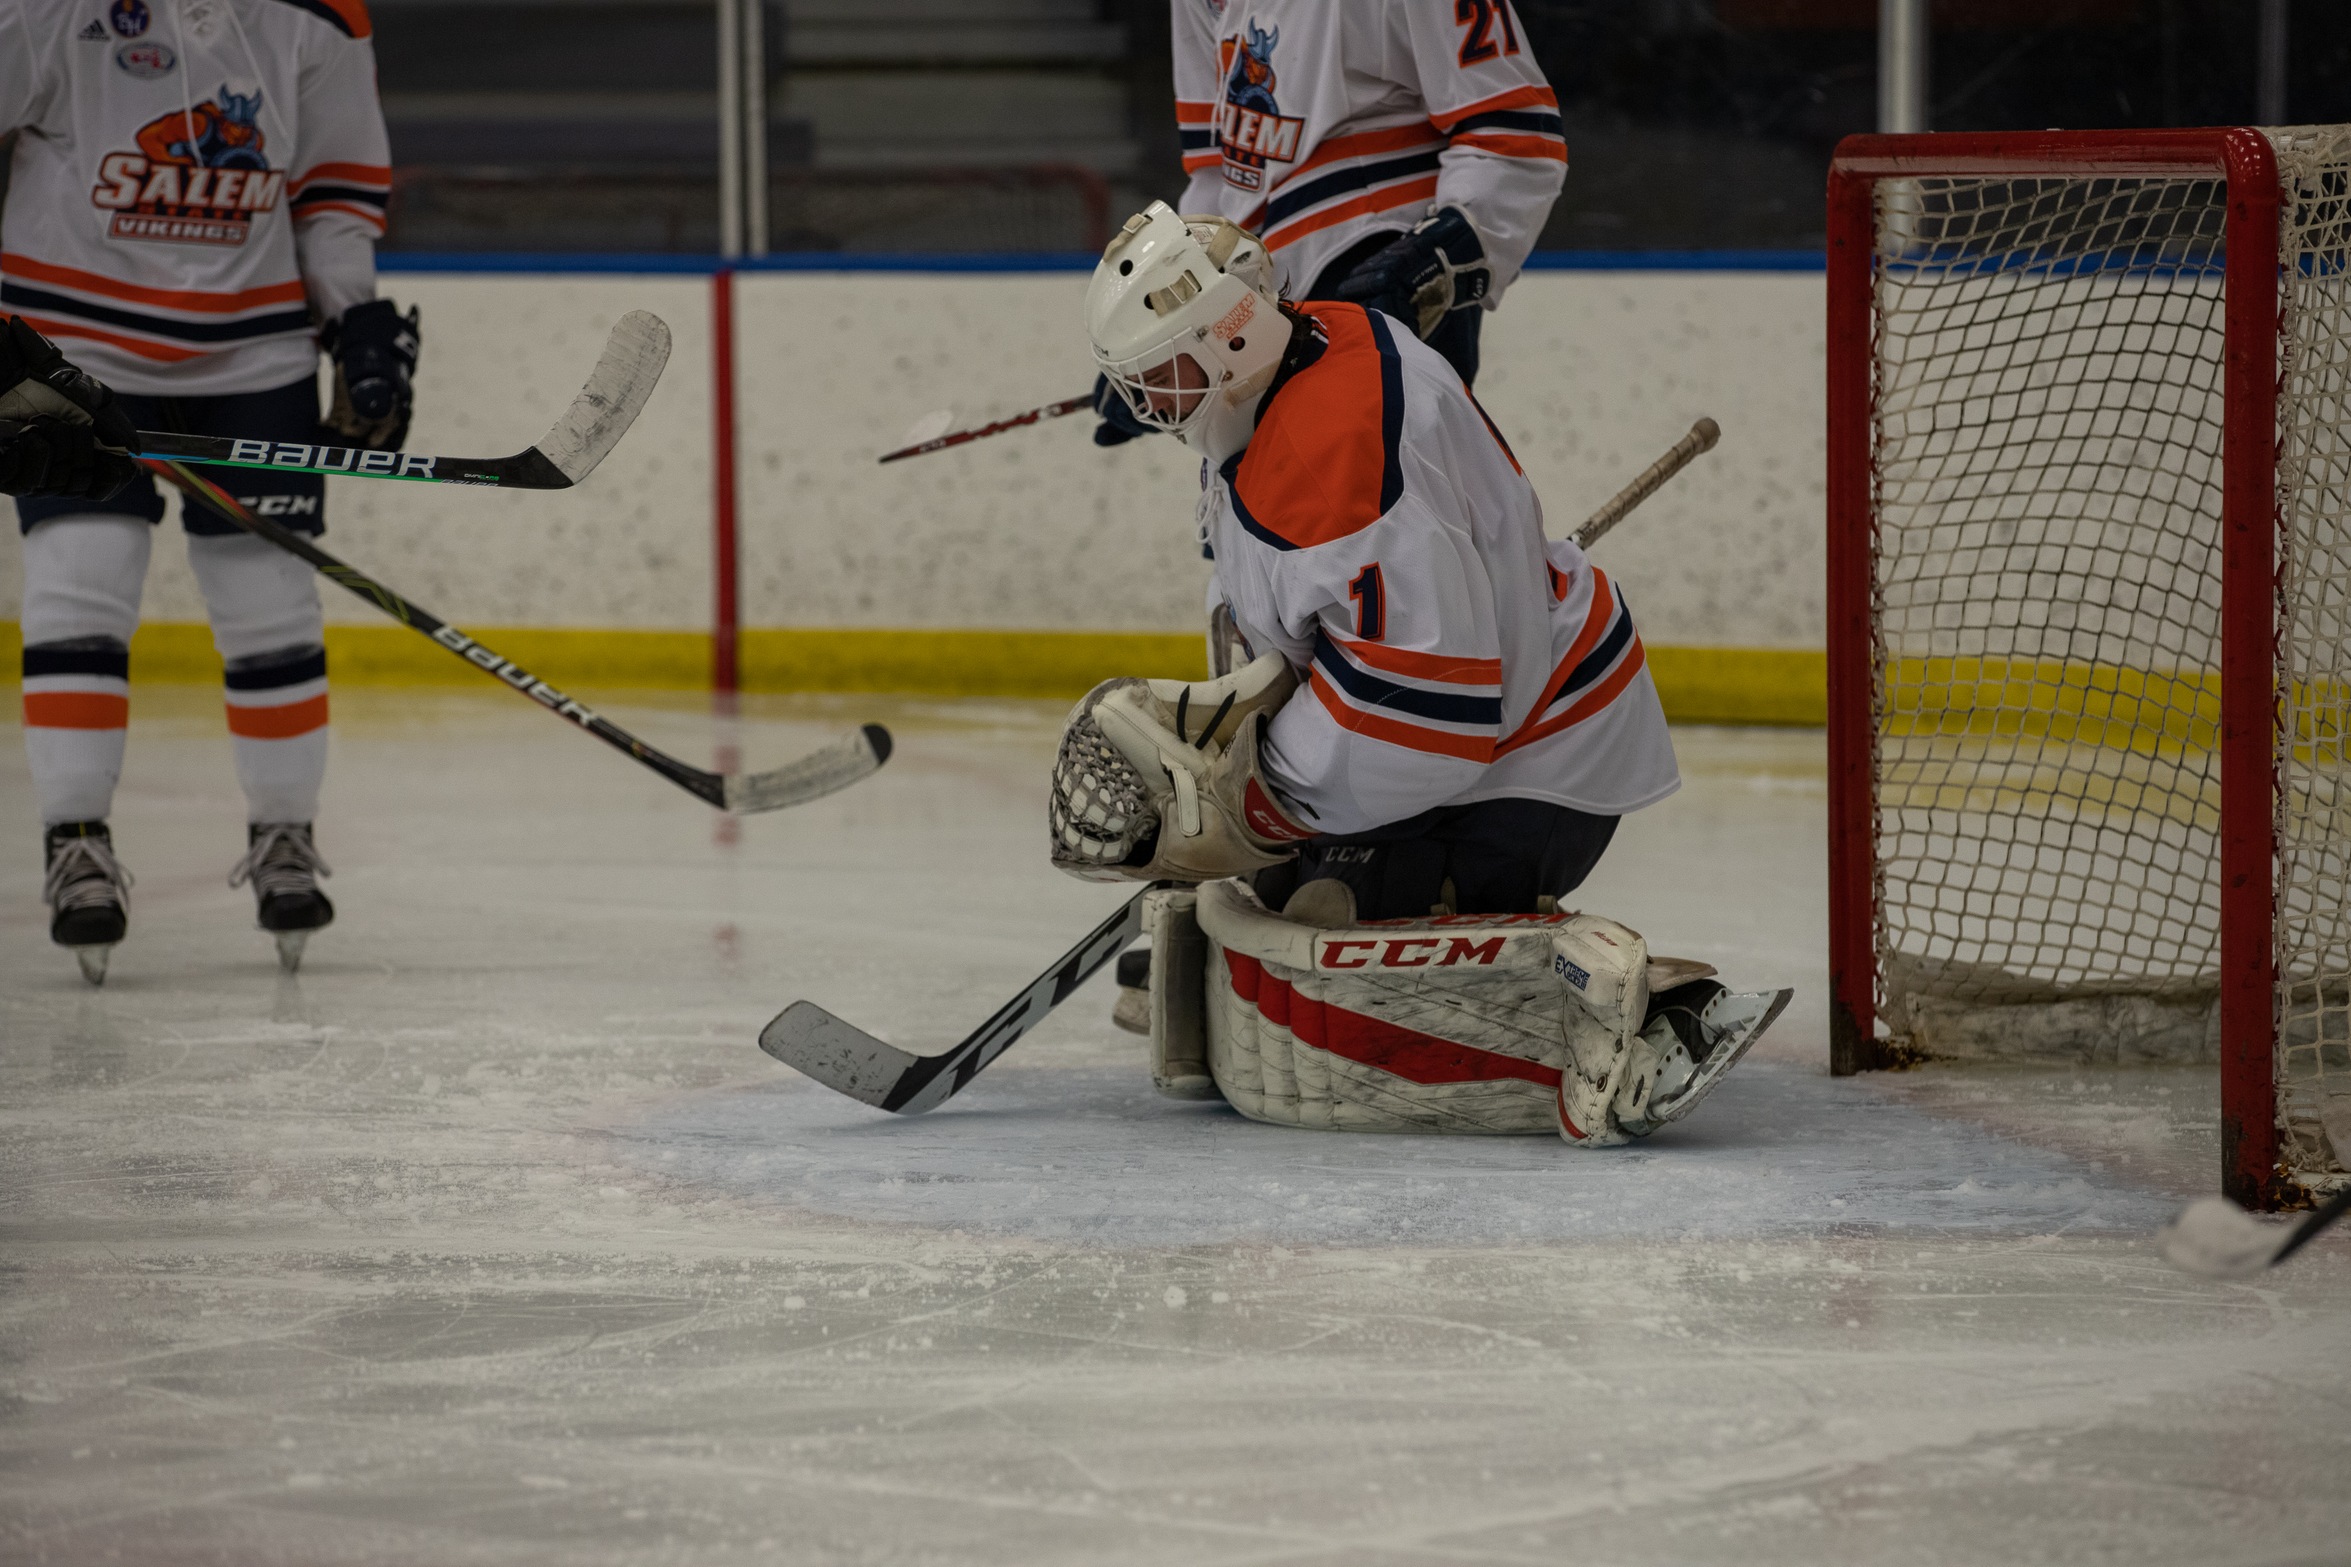 Mercer Posts Shutout, Smith's Goal the Difference in Vikings' 1-0 Win Over Lancers